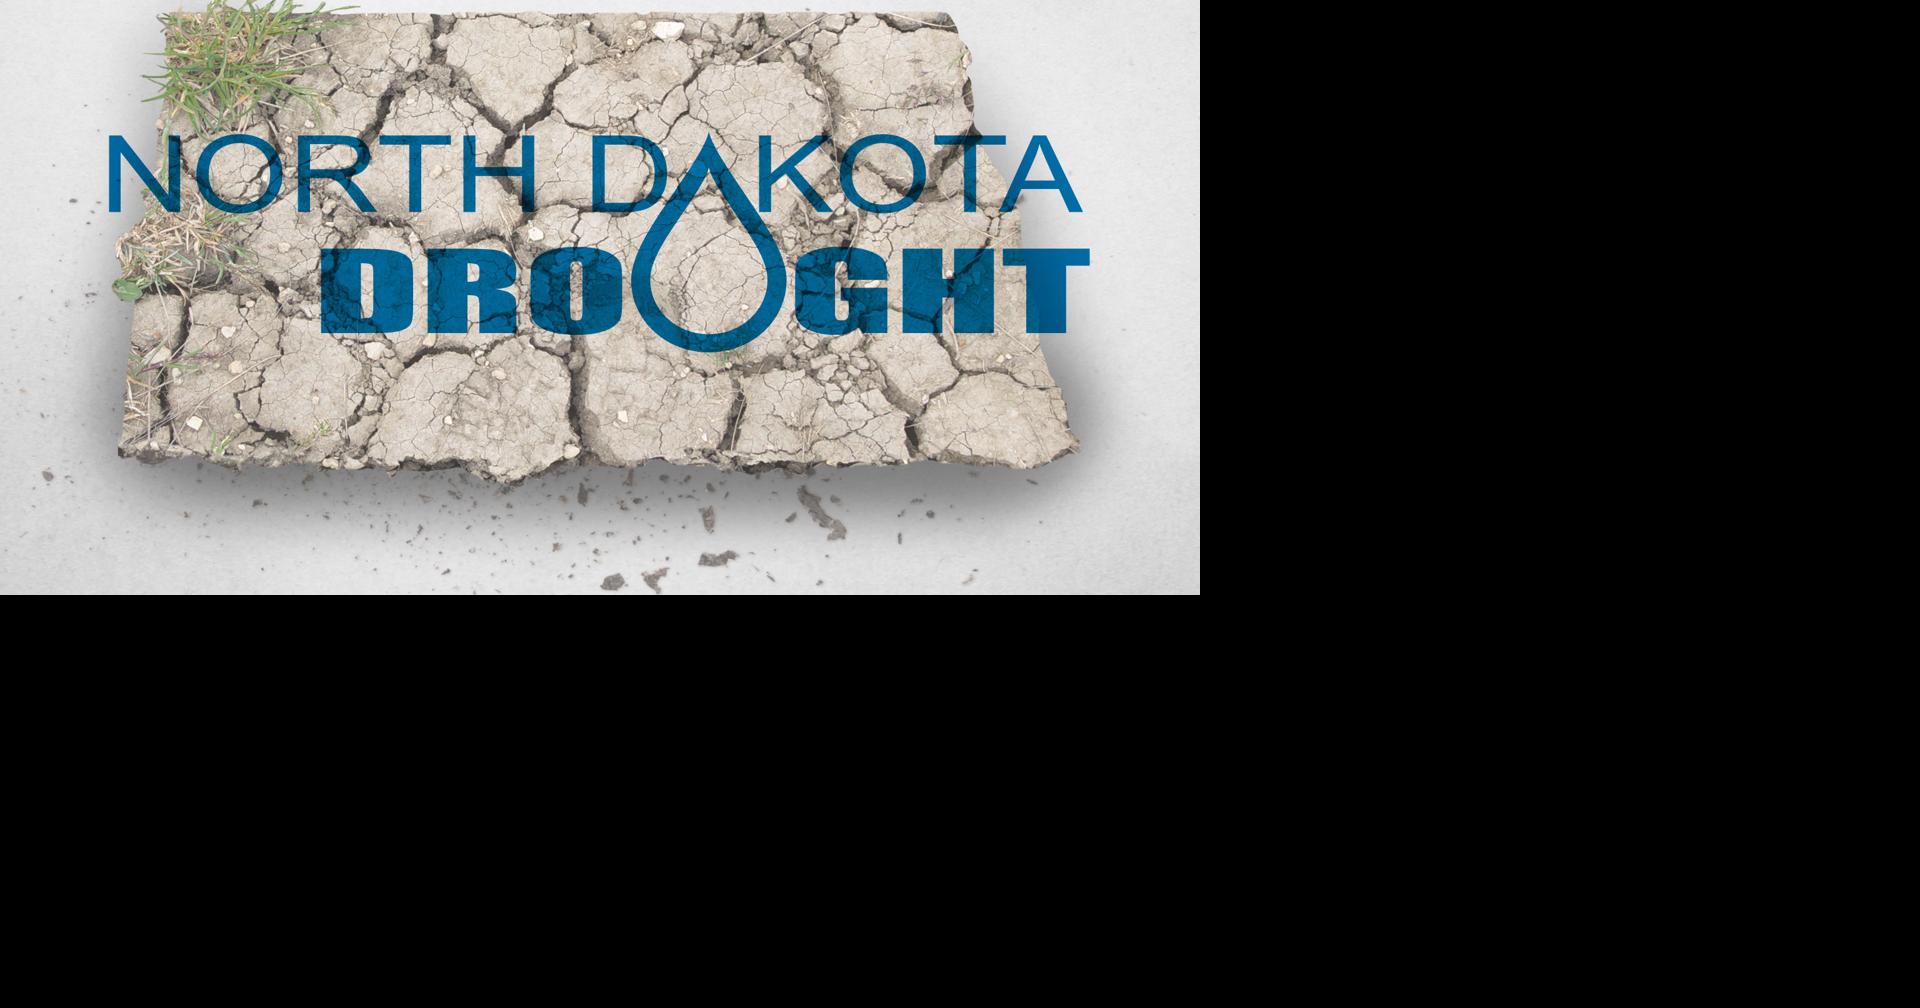 Drought diminishes in concern but flooding woes continue in North Dakota; millions in aid on its way